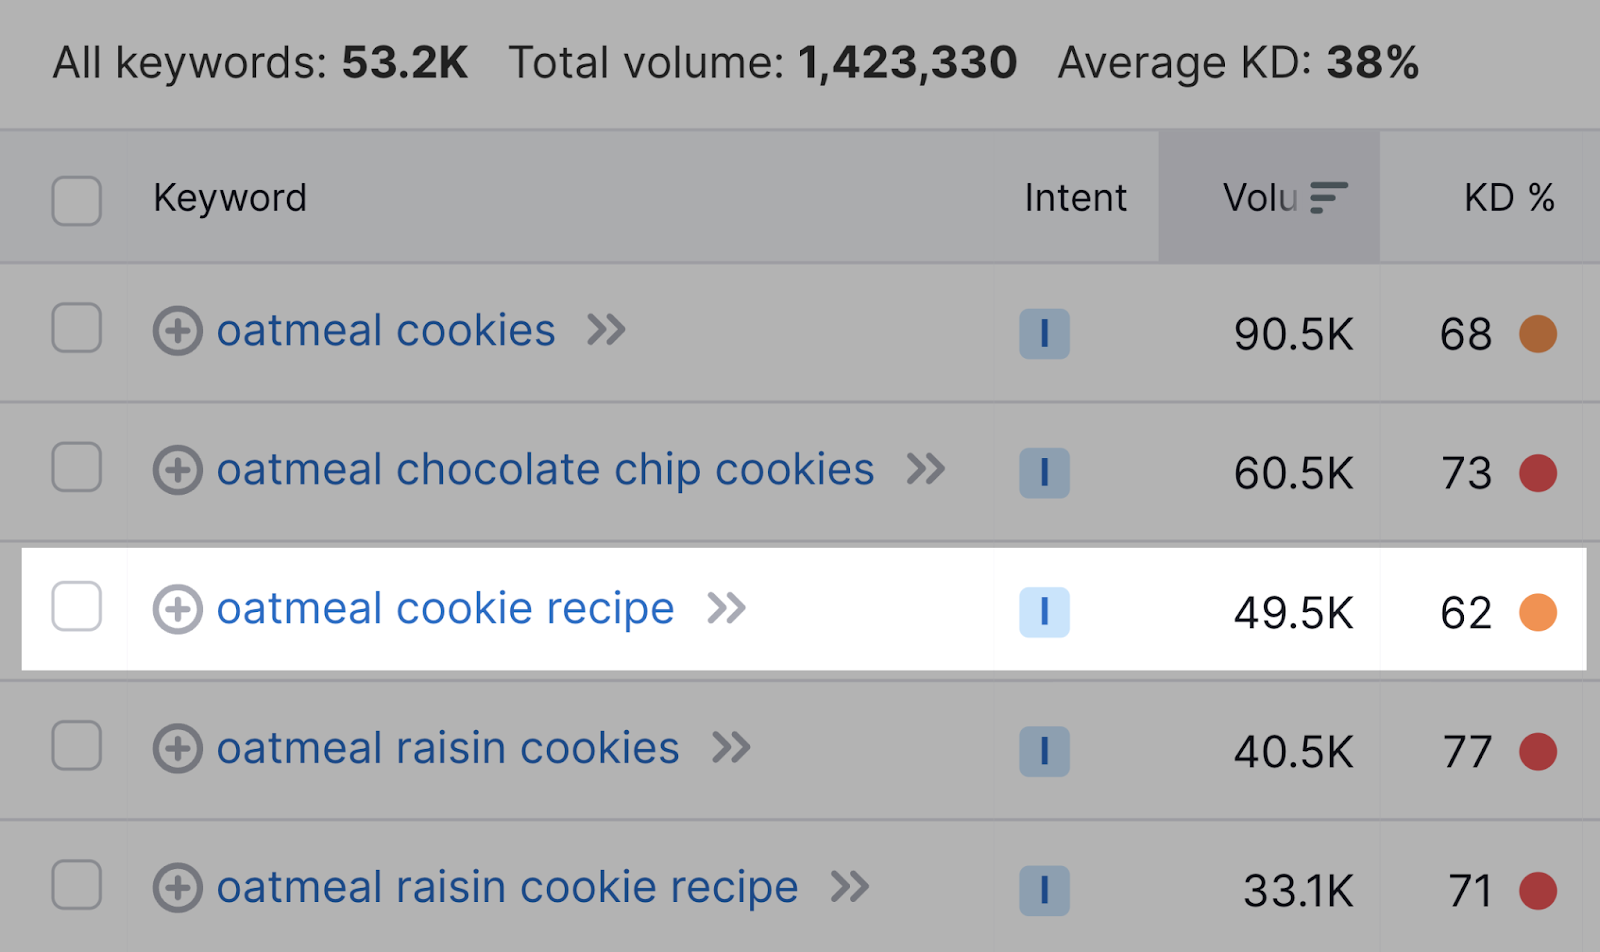 “oatmeal cookie recipe” result highlighted